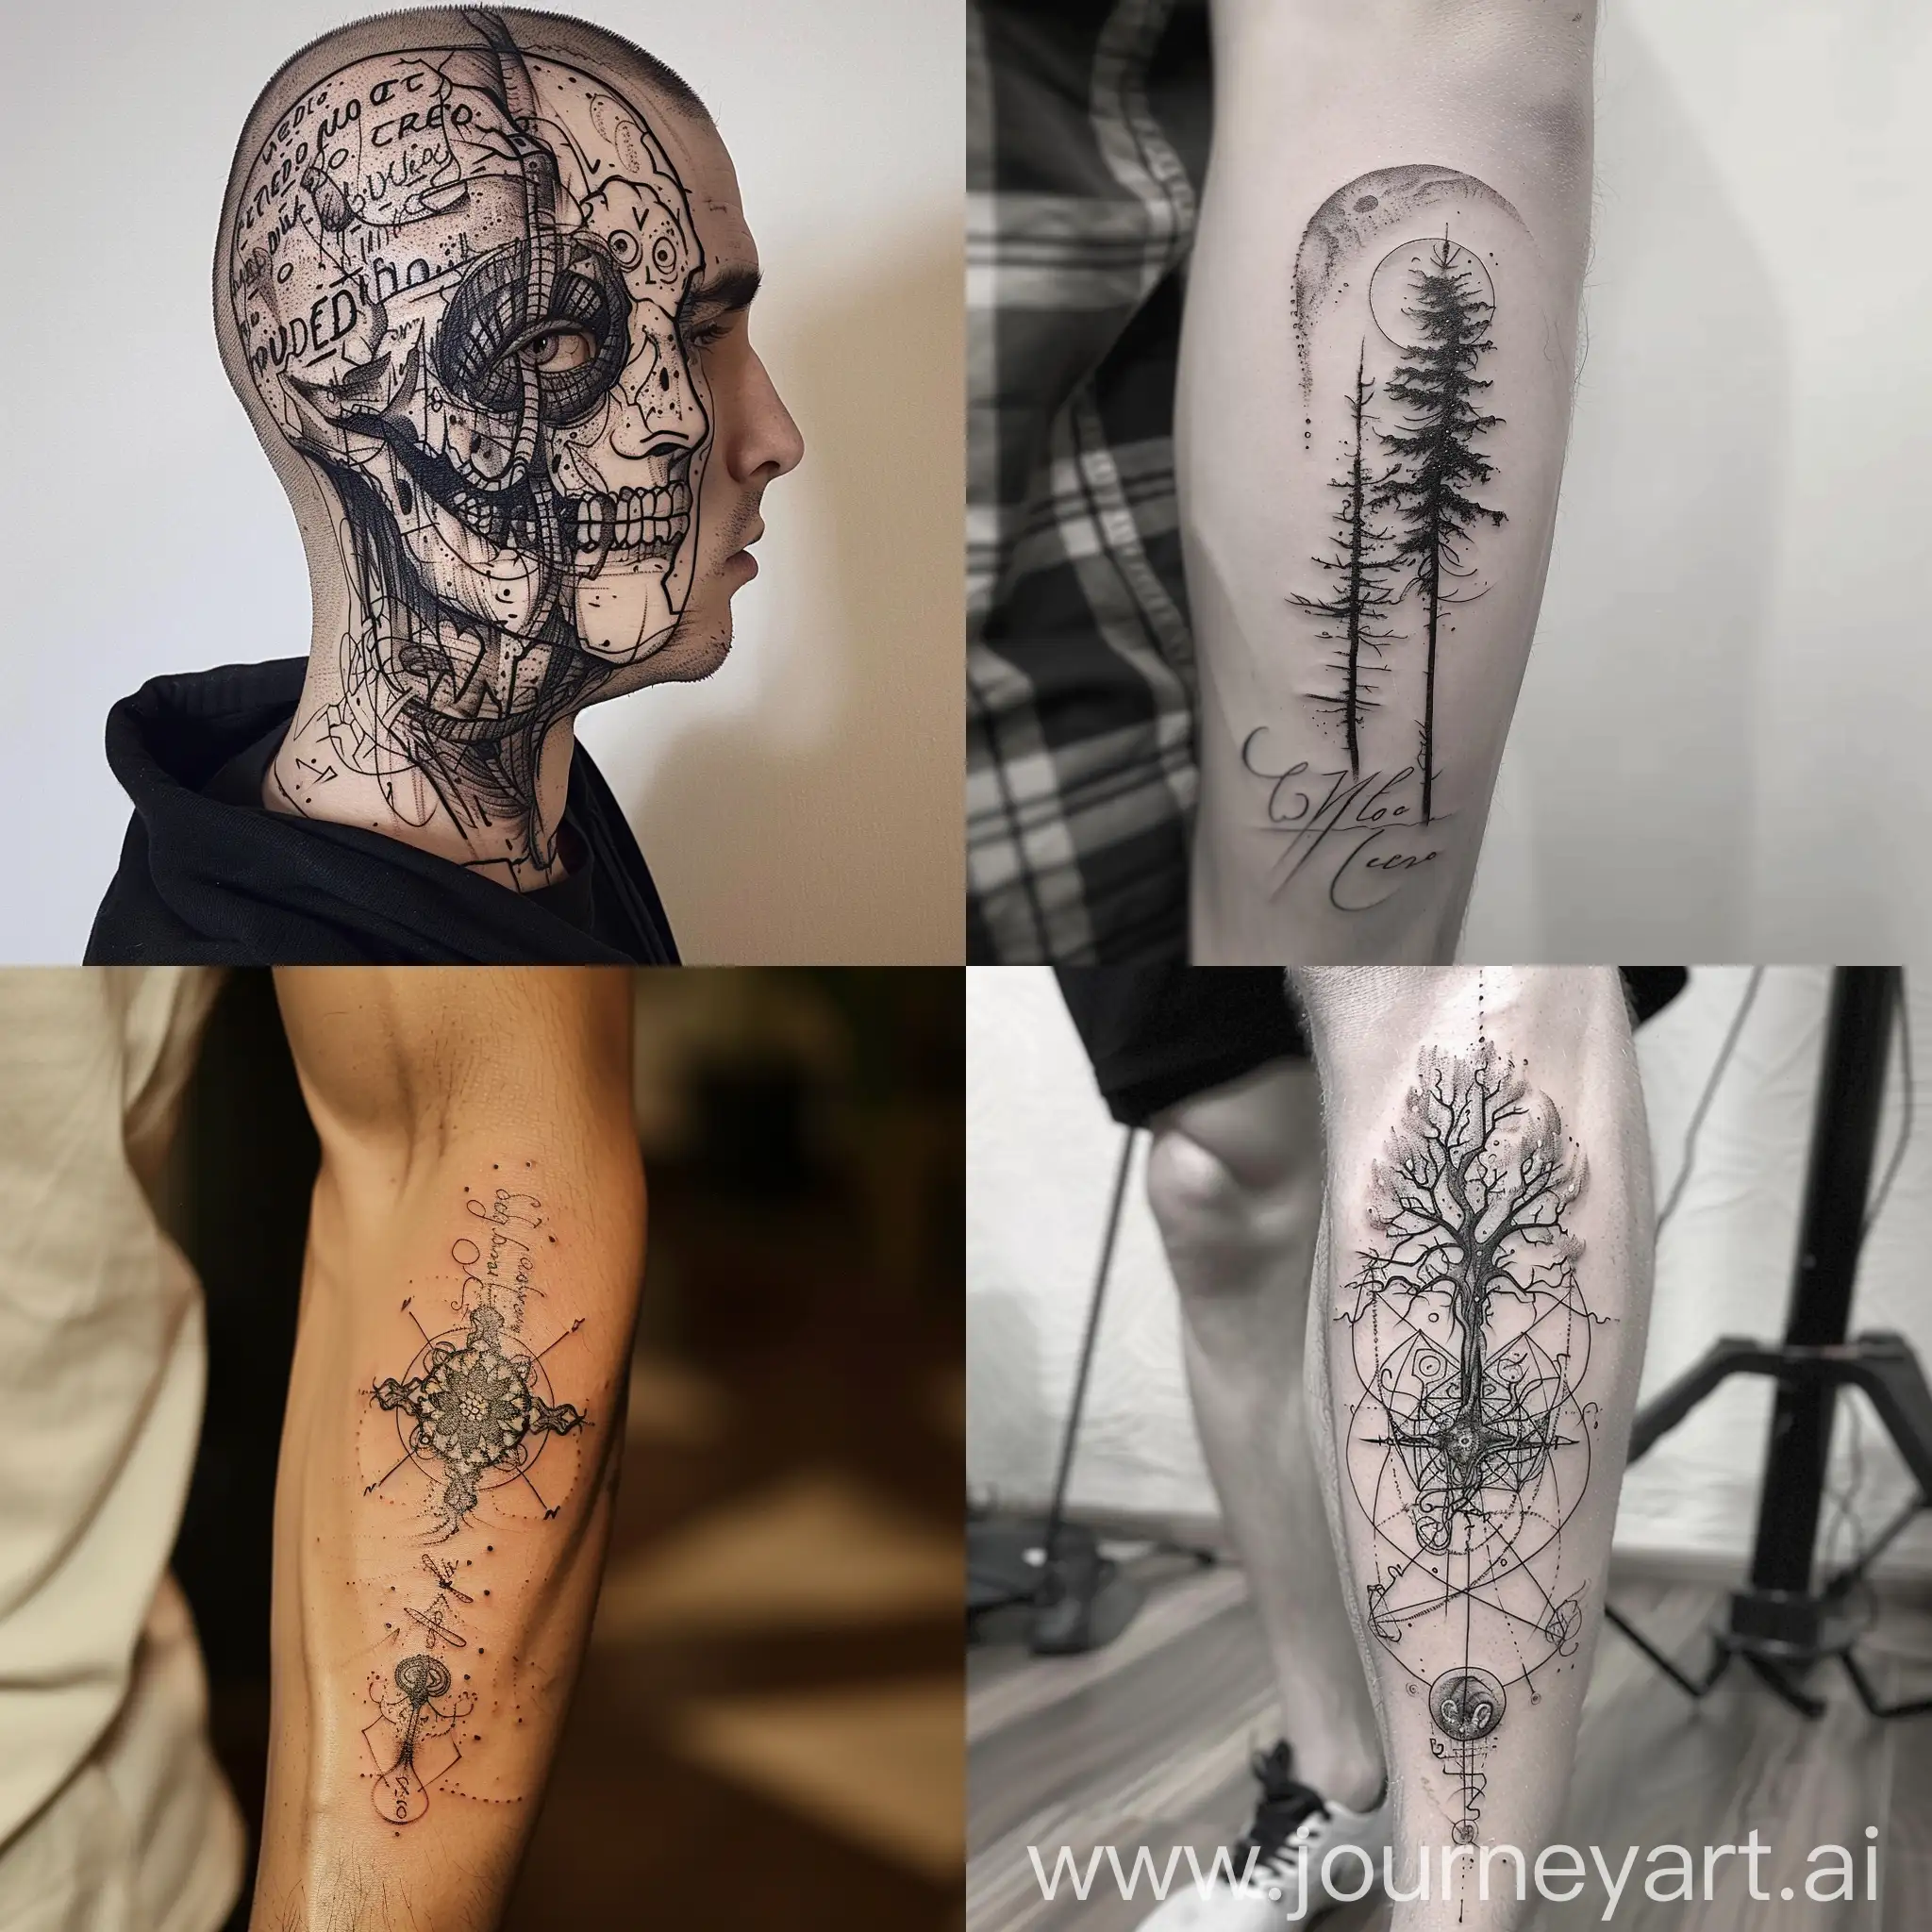 Unique-and-Powerful-Tattoo-Design-Overcoming-Fear